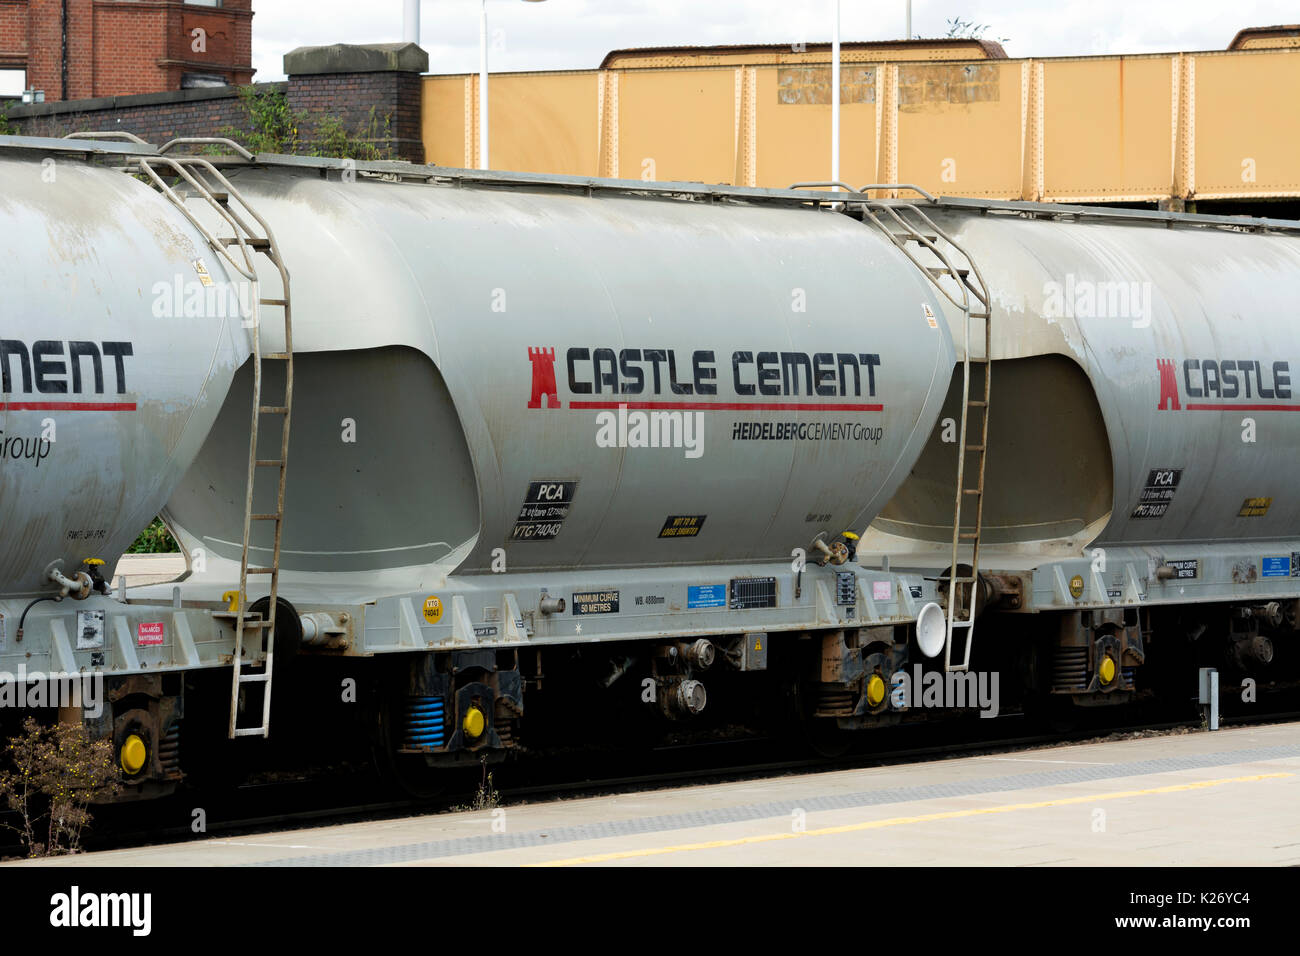 Castle Cement wagons on a train, Leicester, UK Stock Photo